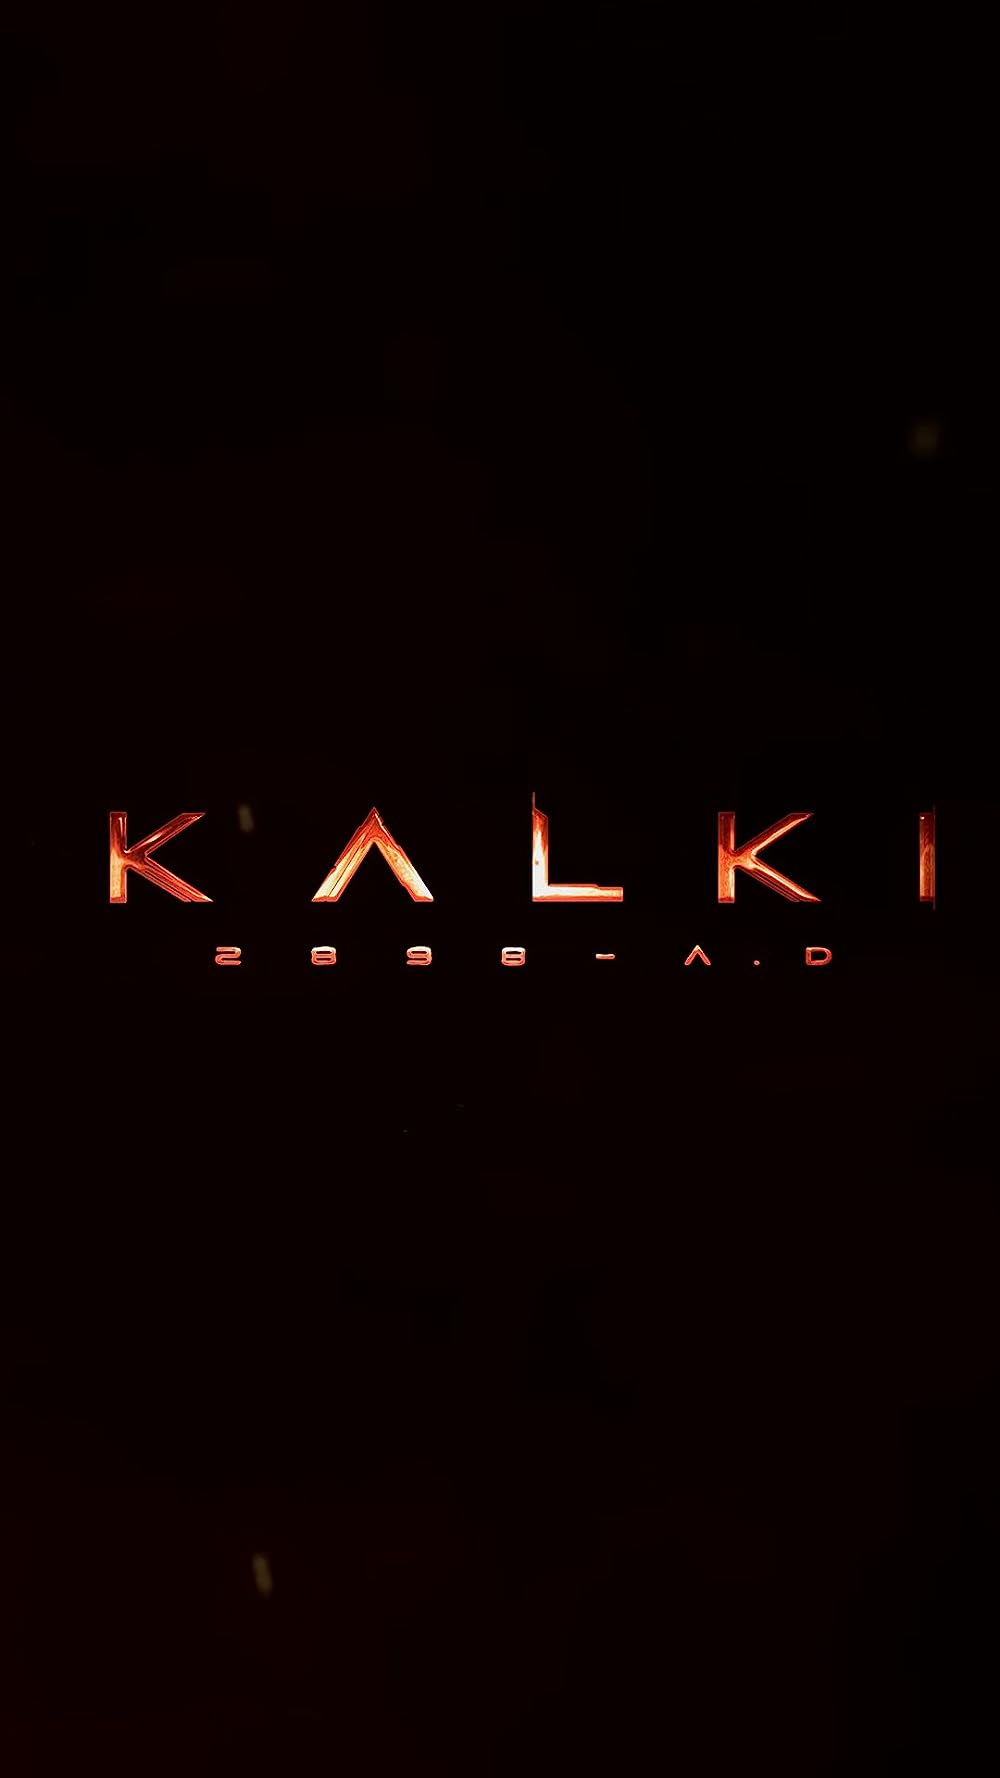 Kalki 2898 AD Movie Release Date, Cast, and Reviews.